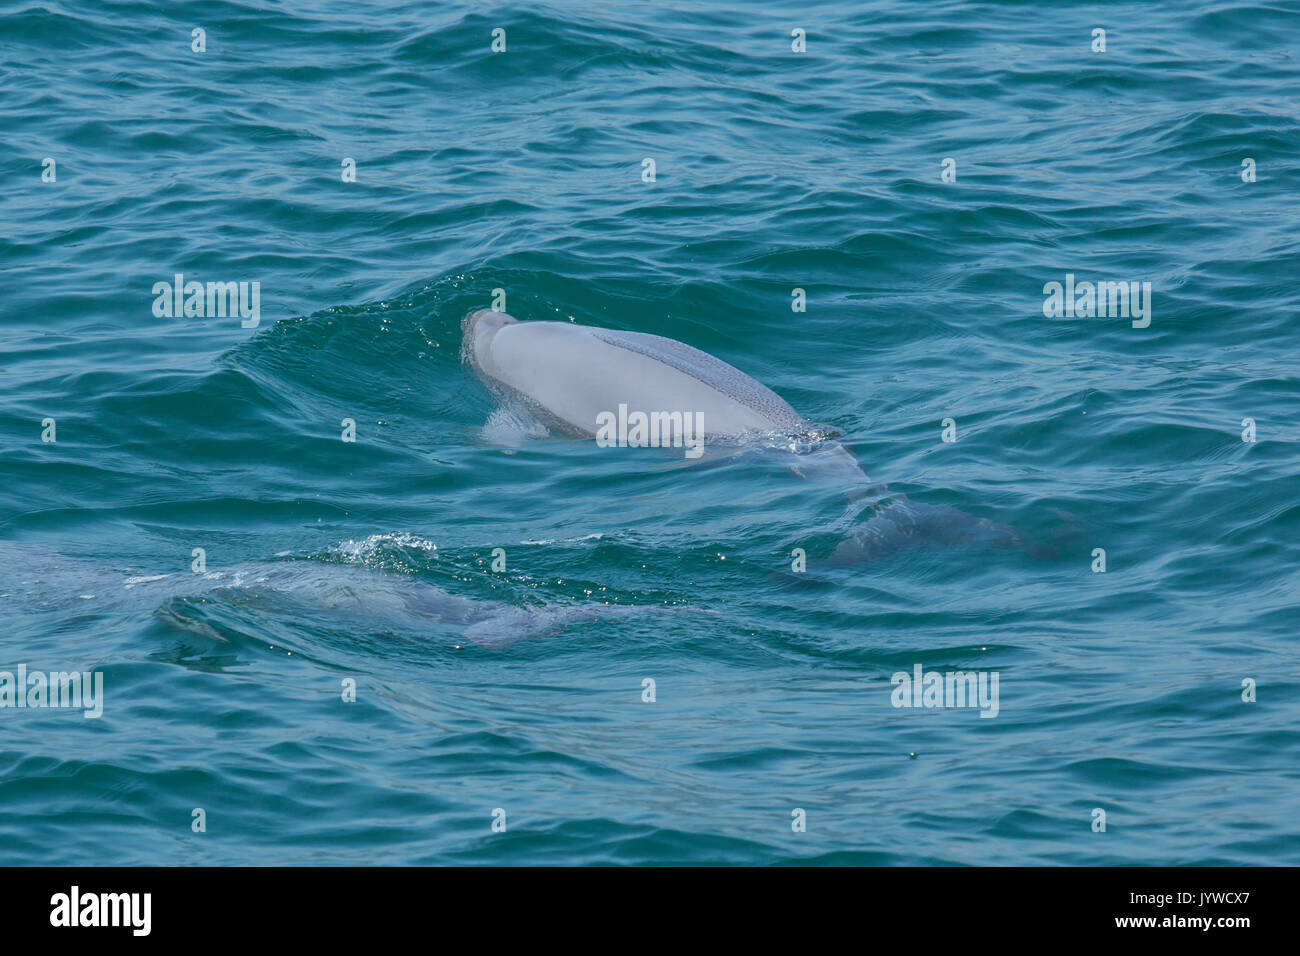 Indo-Pacific Finless Porpoise (Neophocaena phocaenoides) surfacing in Hong Kong waters Stock Photo